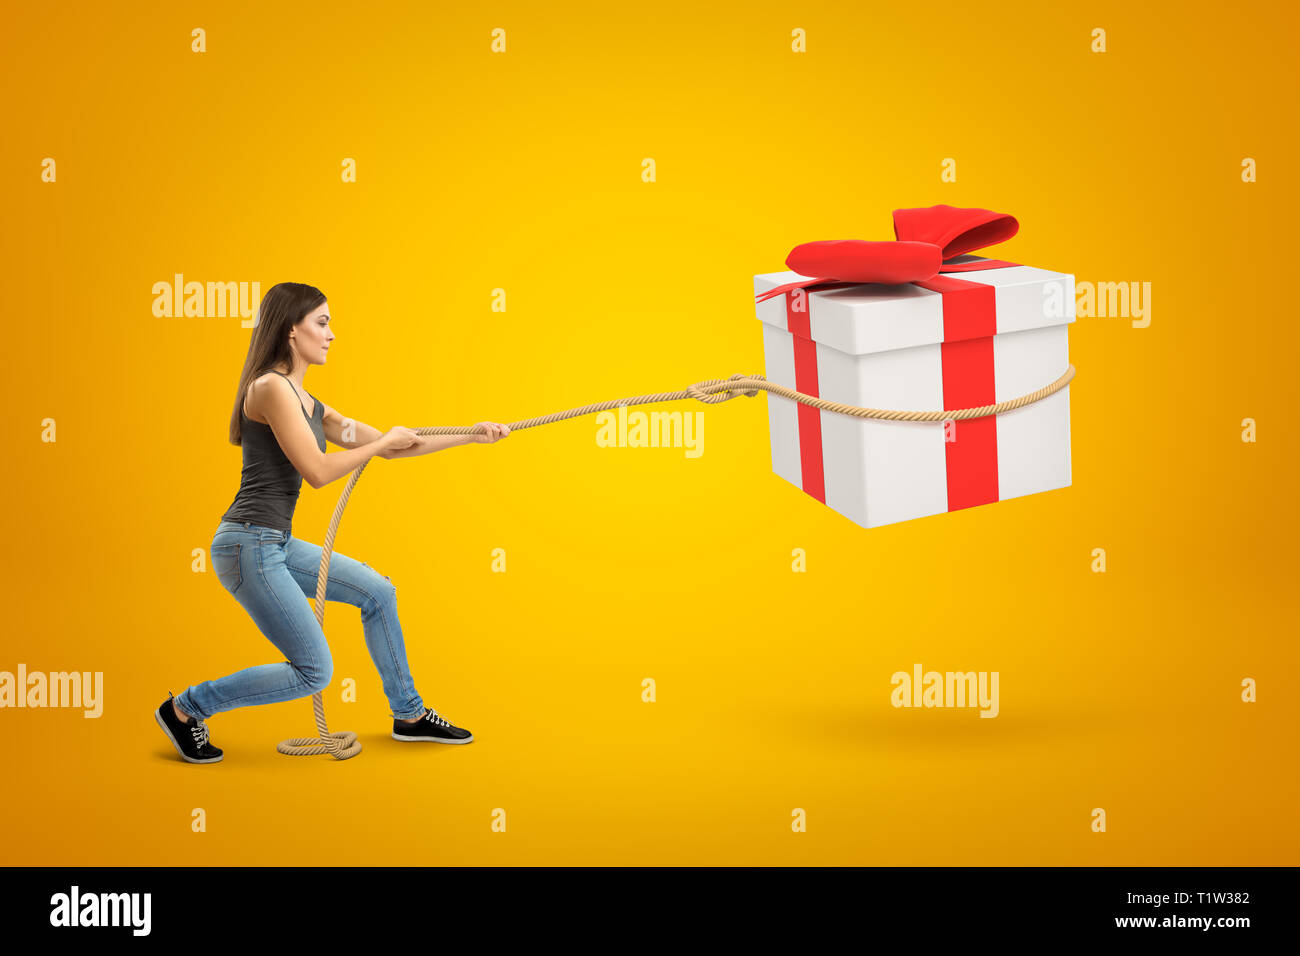 Side view of young woman standing with bent knees and pulling big gift box in air which she has lassoed, on yellow background. Stock Photo